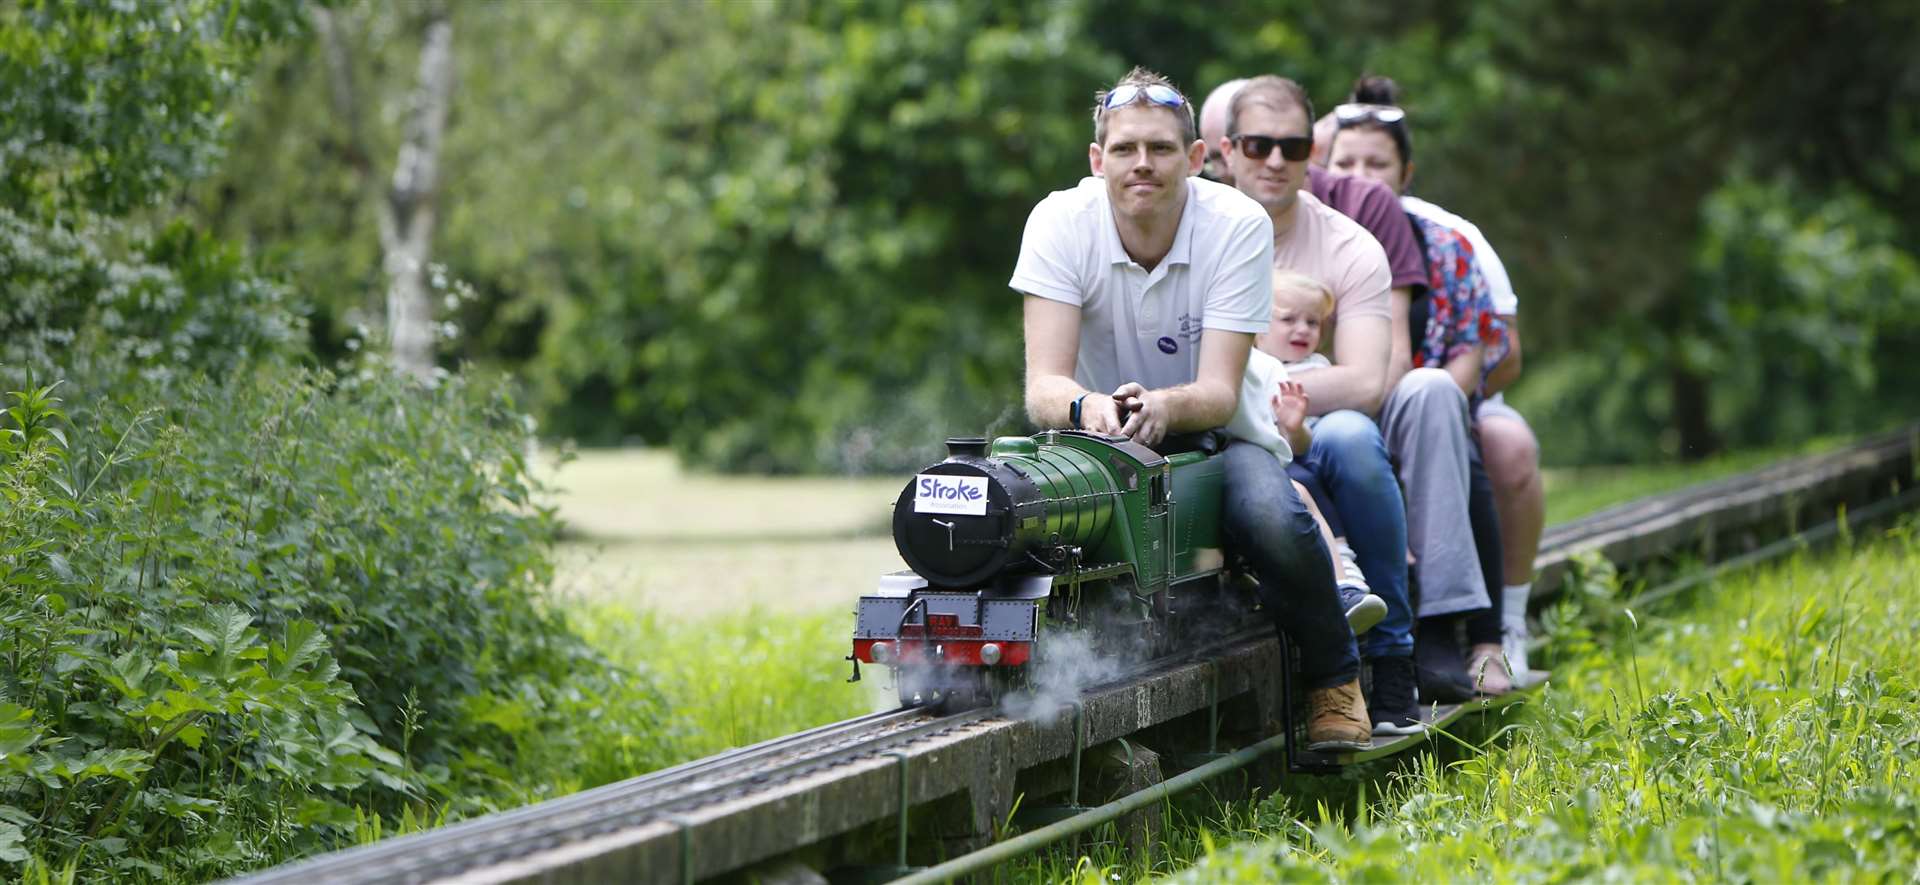 MMES offers rides on the miniature railway in Mote Park. Picture: Andy Jones